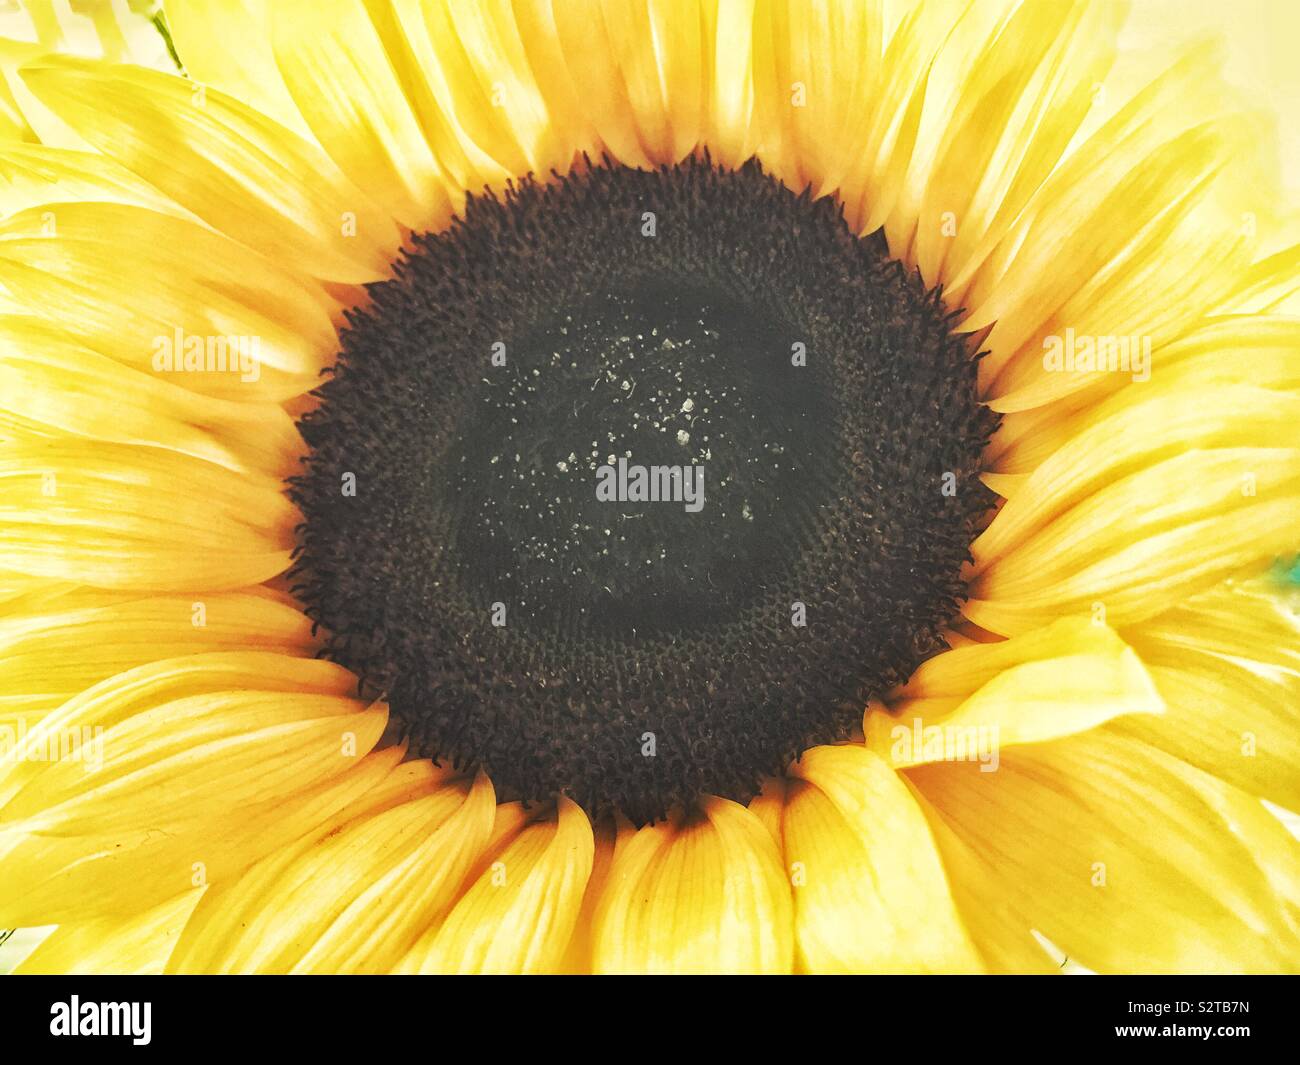 The centre of a Sunflower Stock Photo